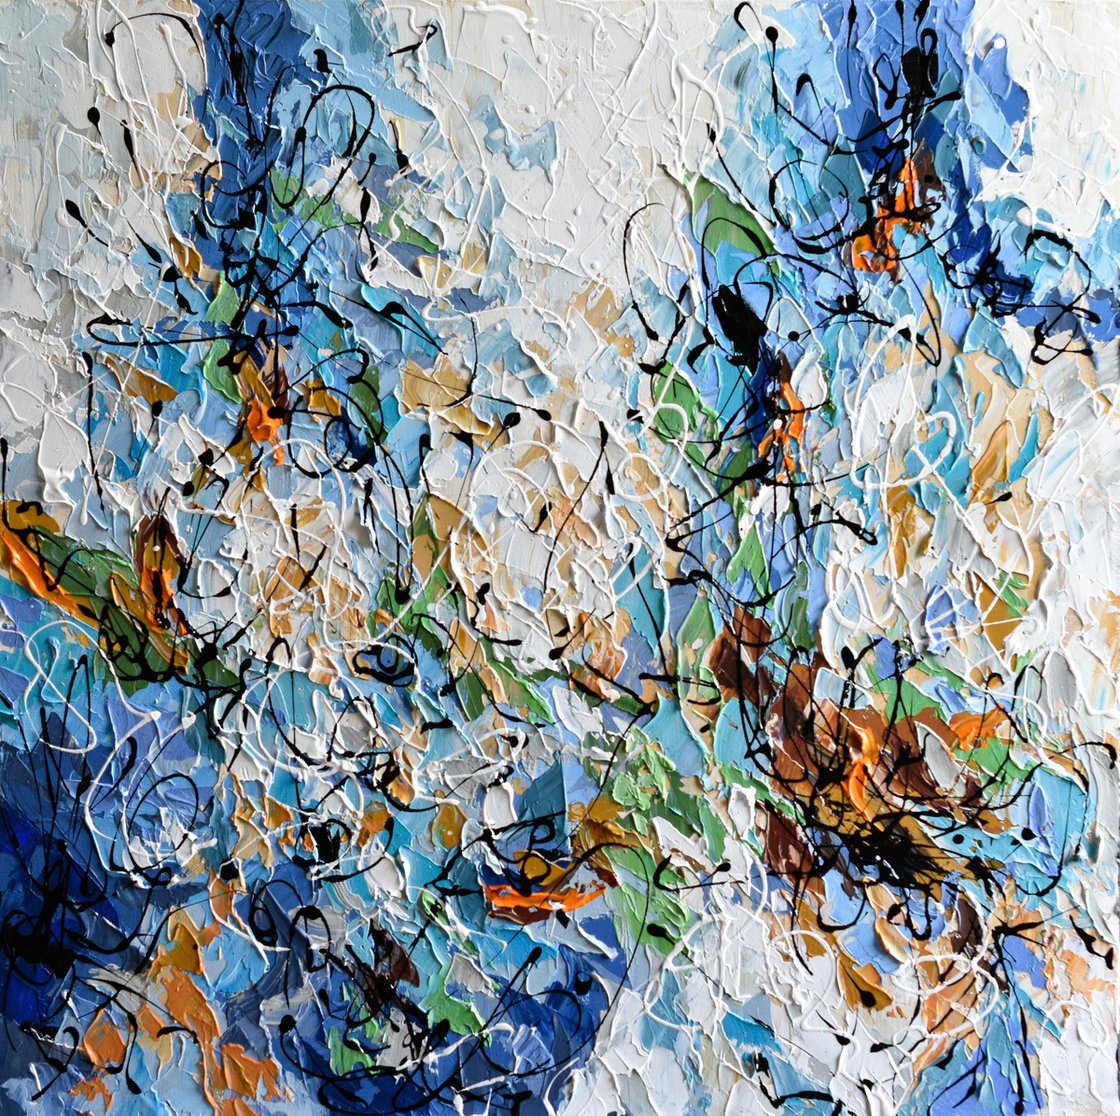 Better Days - Abstract Acrylic Painting, Palette Knife Art, Blue